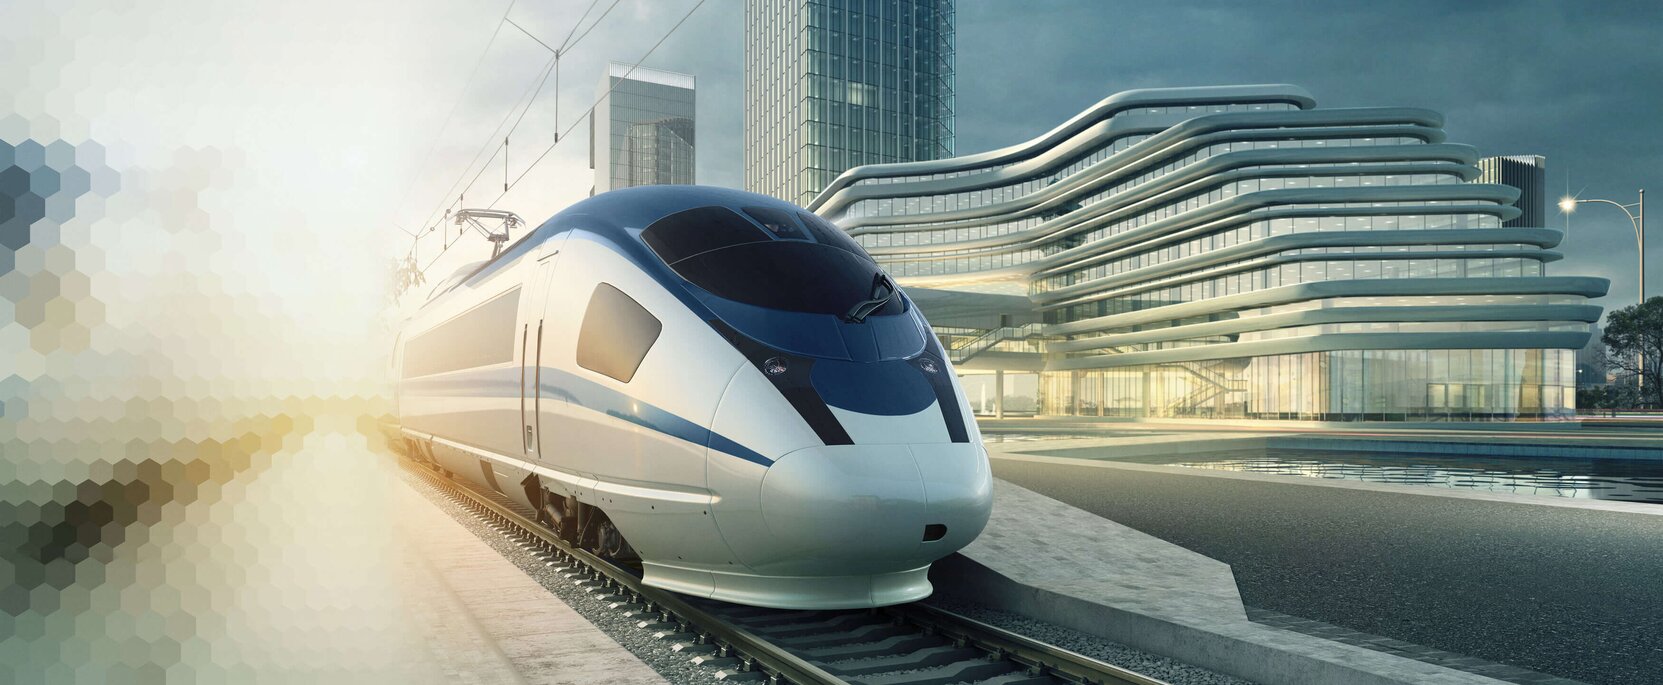  High speed train with overhead contact line and pantograph